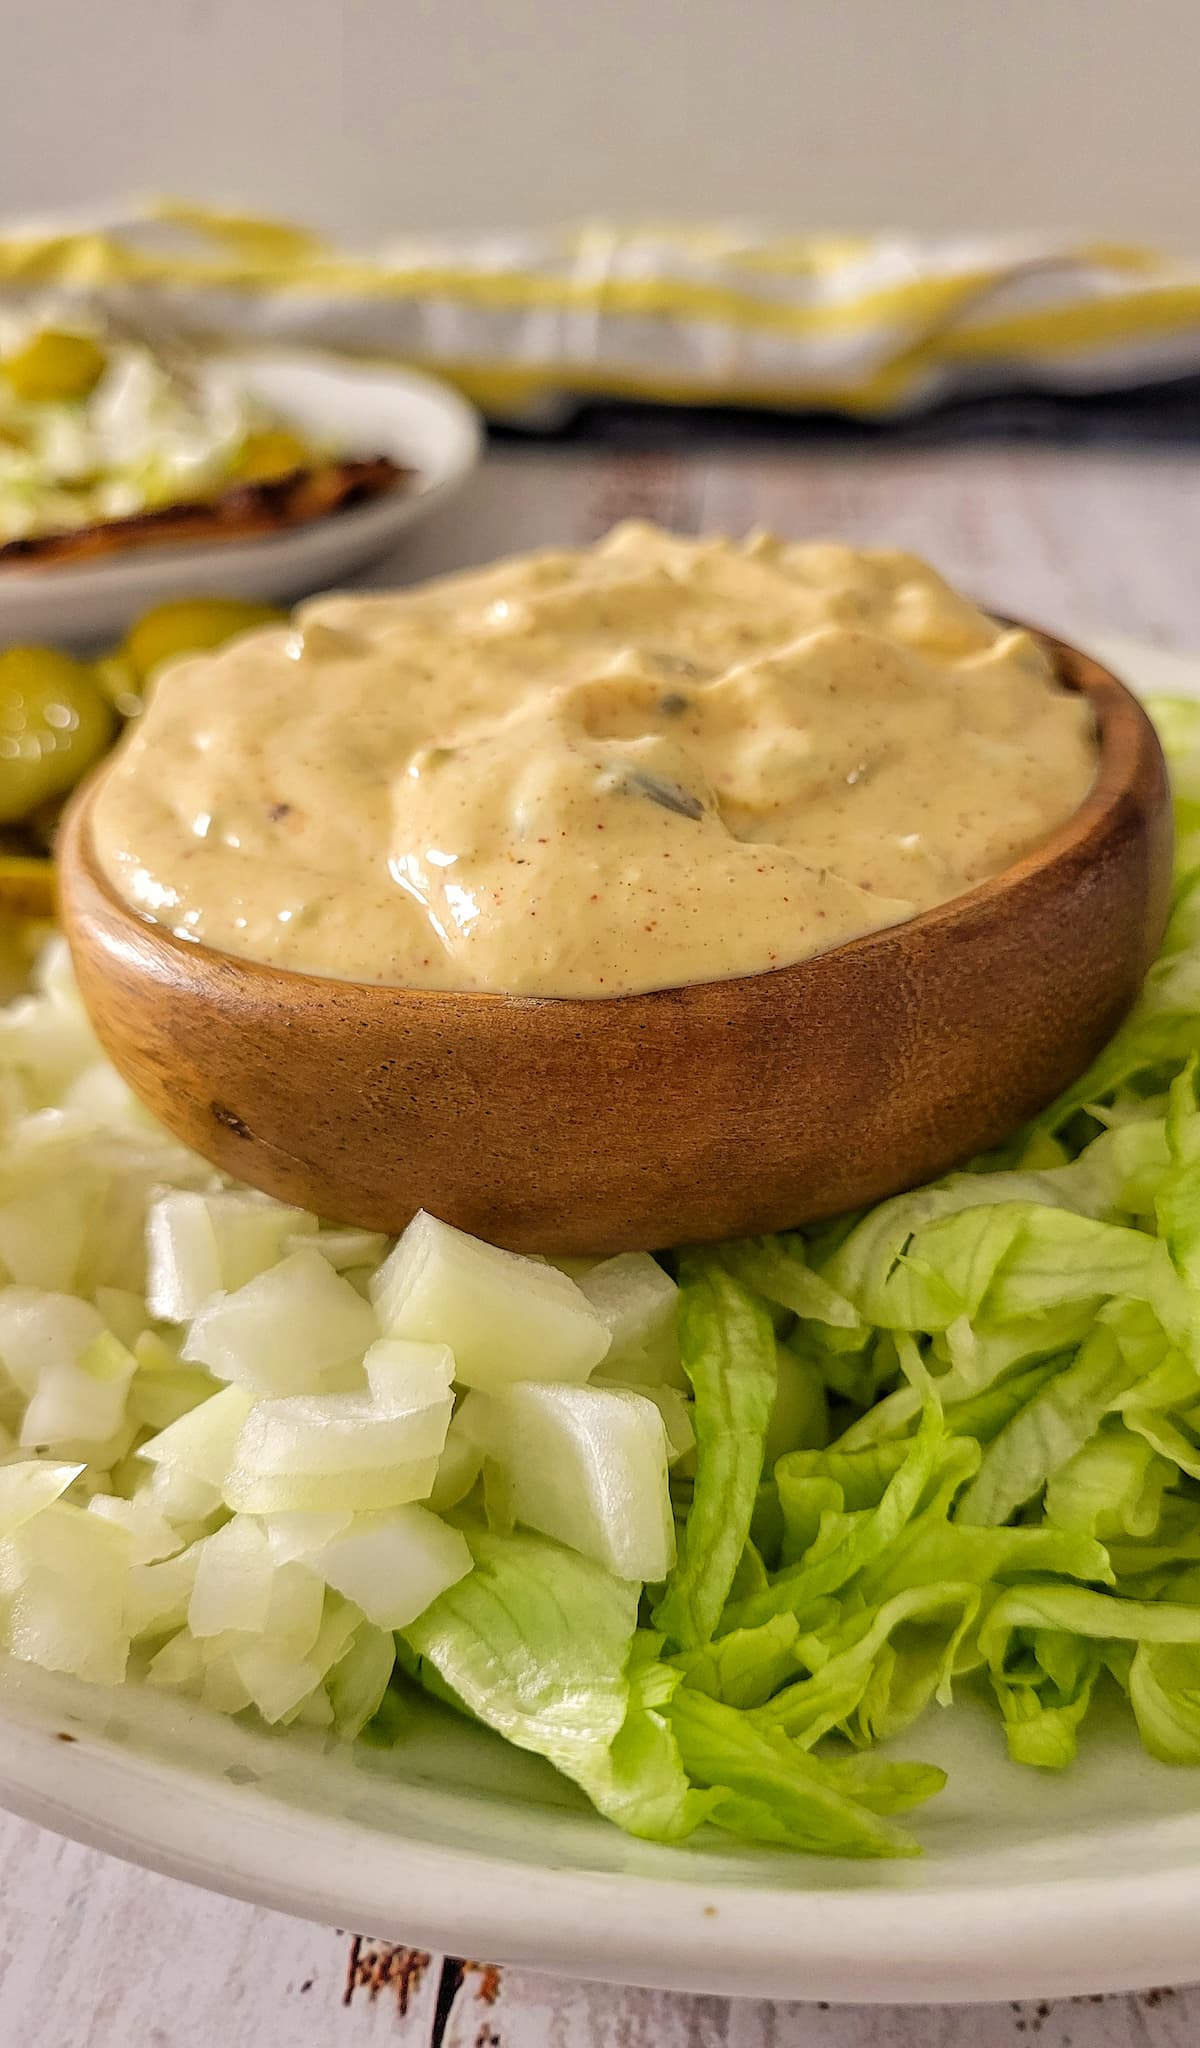 big mac sauce in a bowl on a plate with diced white onions and shredded lettuce